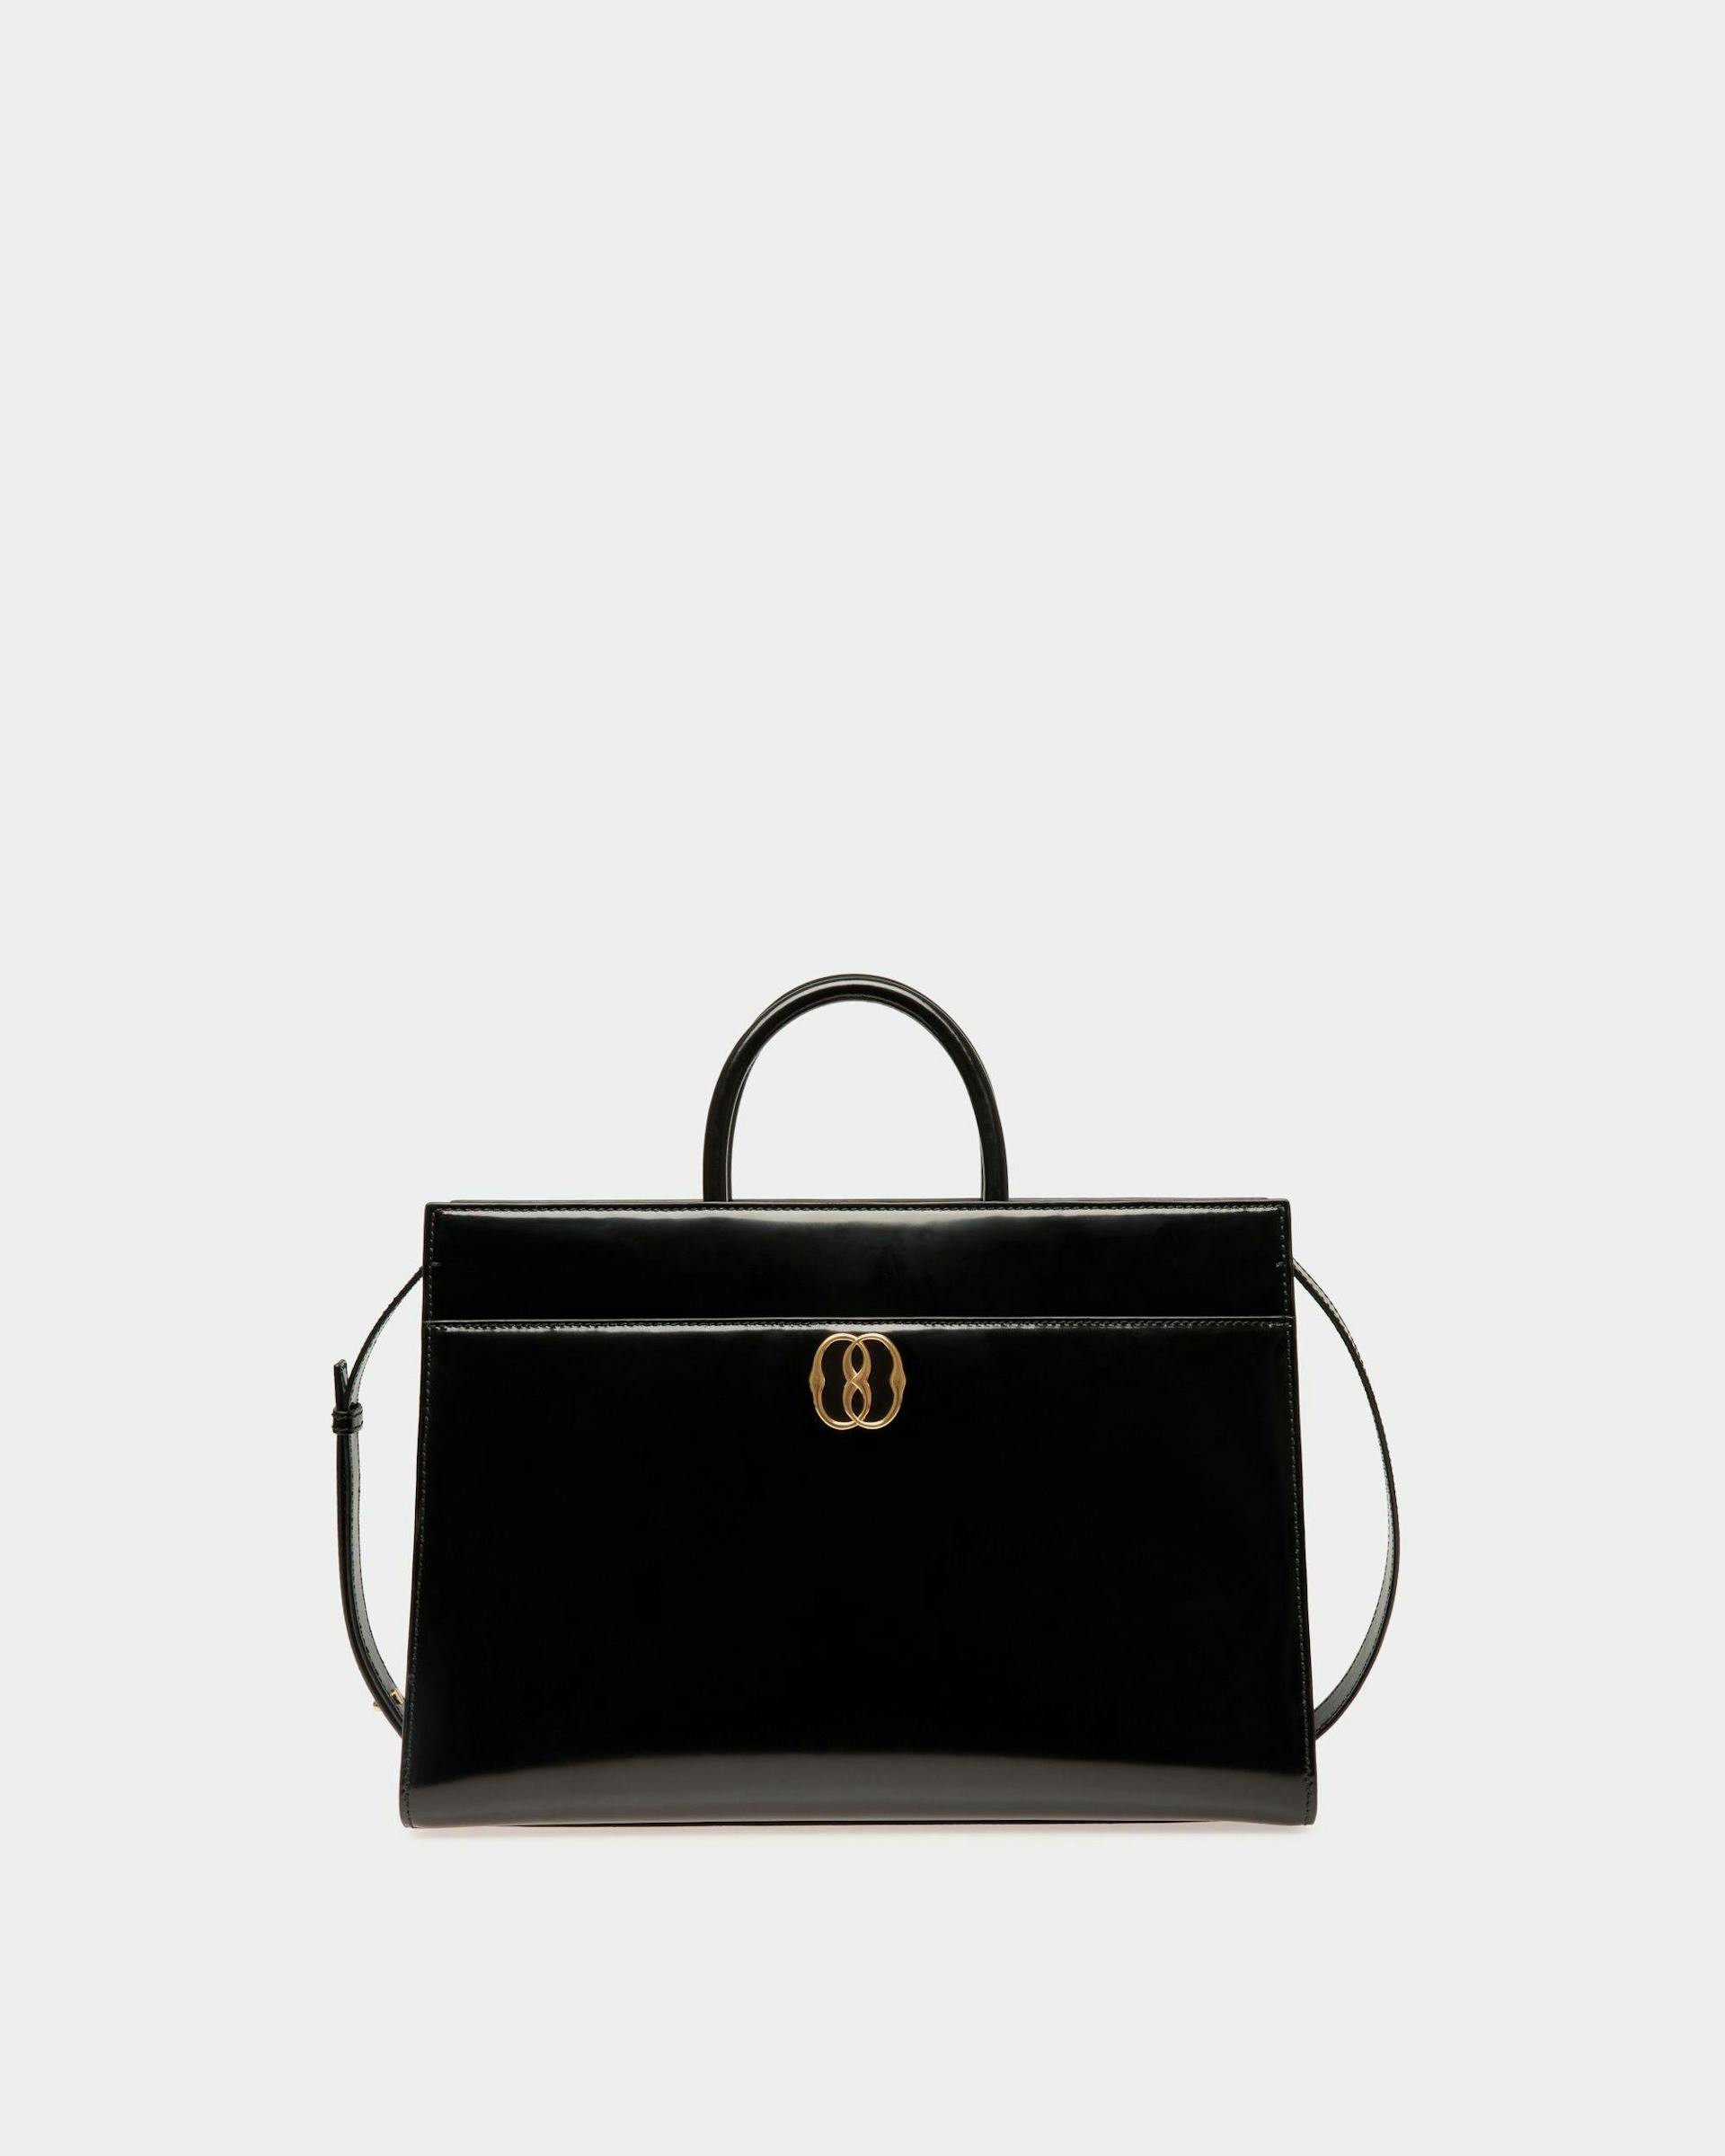 Women's Emblem Tote Bag In Black Patent Leather | Bally | Still Life Front